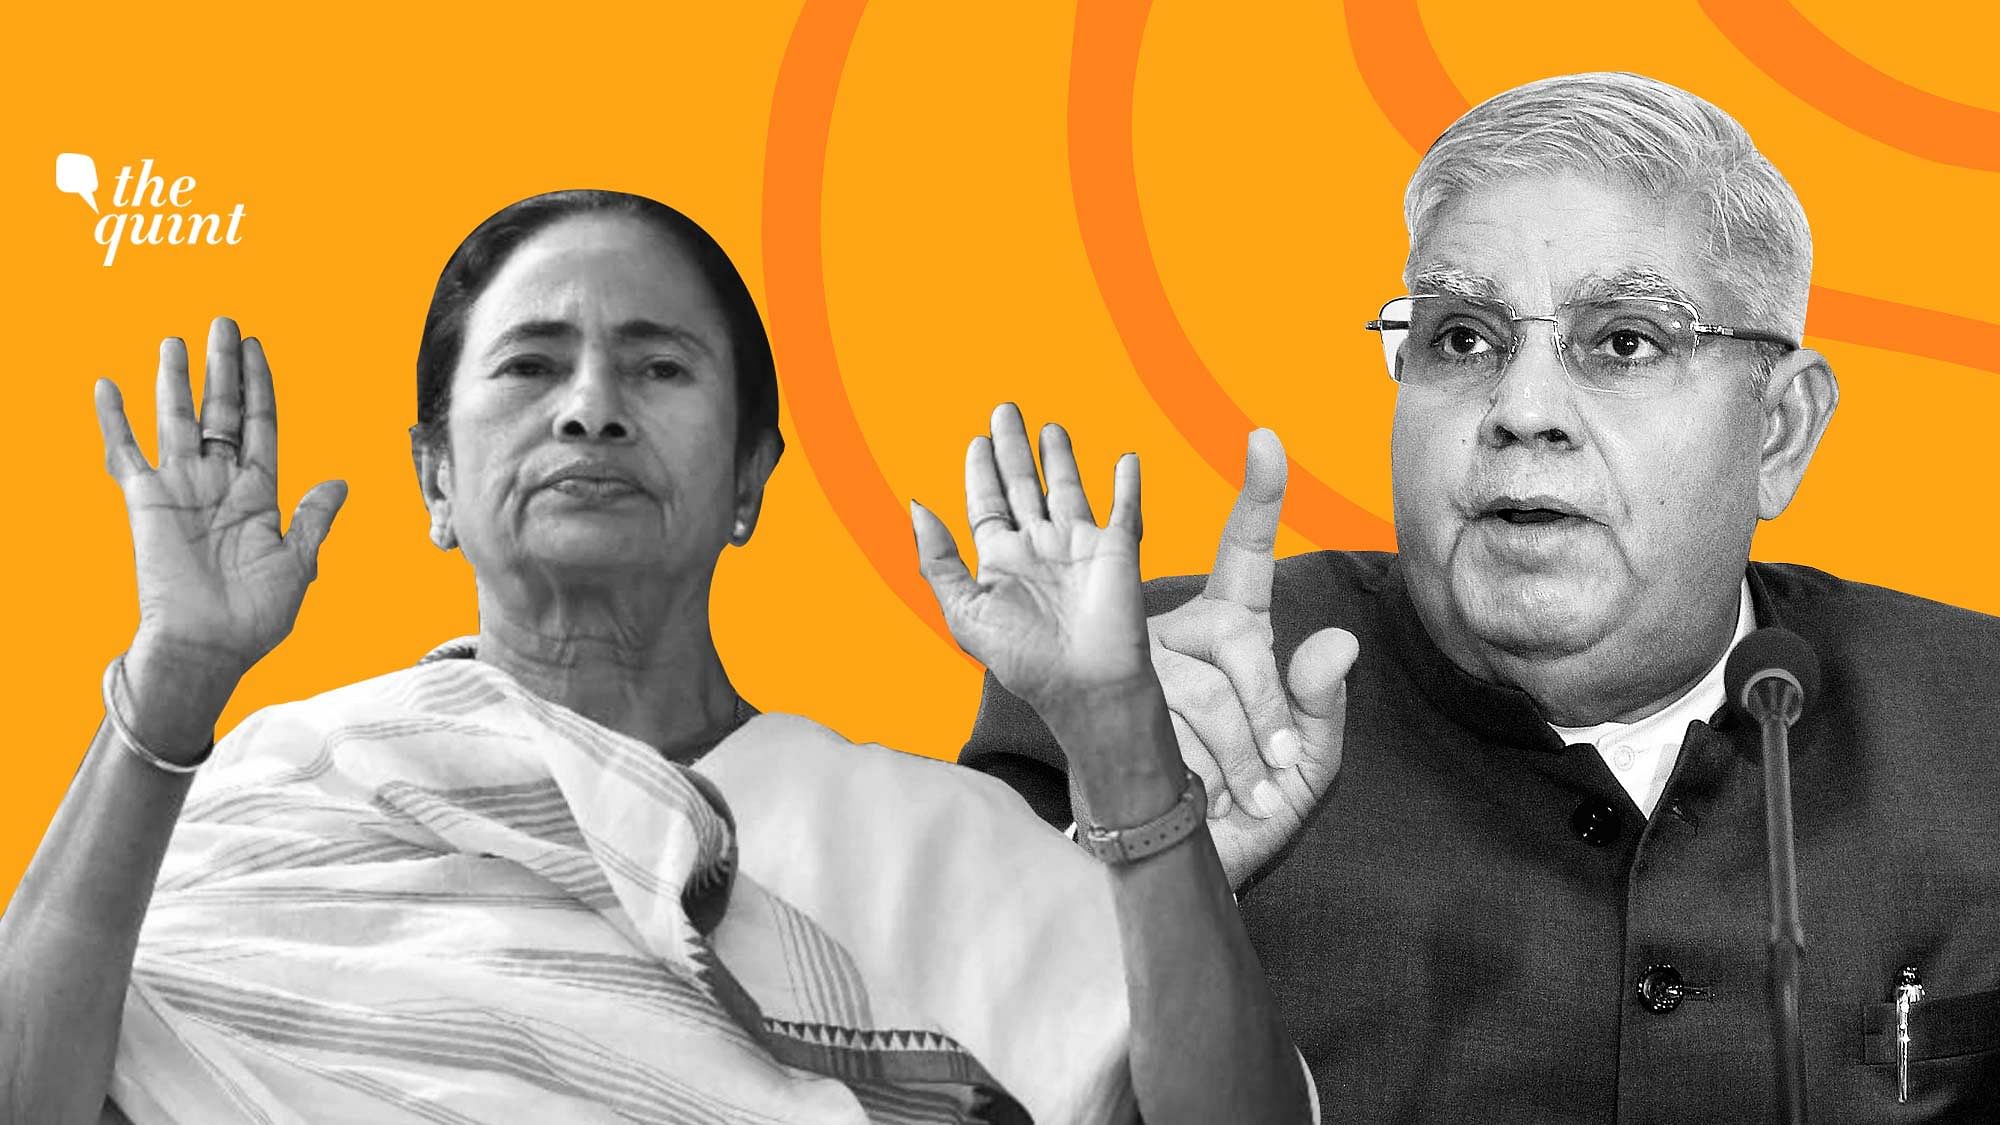 West Bengal Governor Jagdeep Dhankhar on Tuesday, 15 June penned a letter to Chief Minister Mamata Banerjee, and alleged her of ‘continued silence’ over the post-poll <a href="https://www.thequint.com/west-bengal-elections/west-bengal-elections-post-poll-violence-death-misinformation-politics">violence</a> in the state.<br>